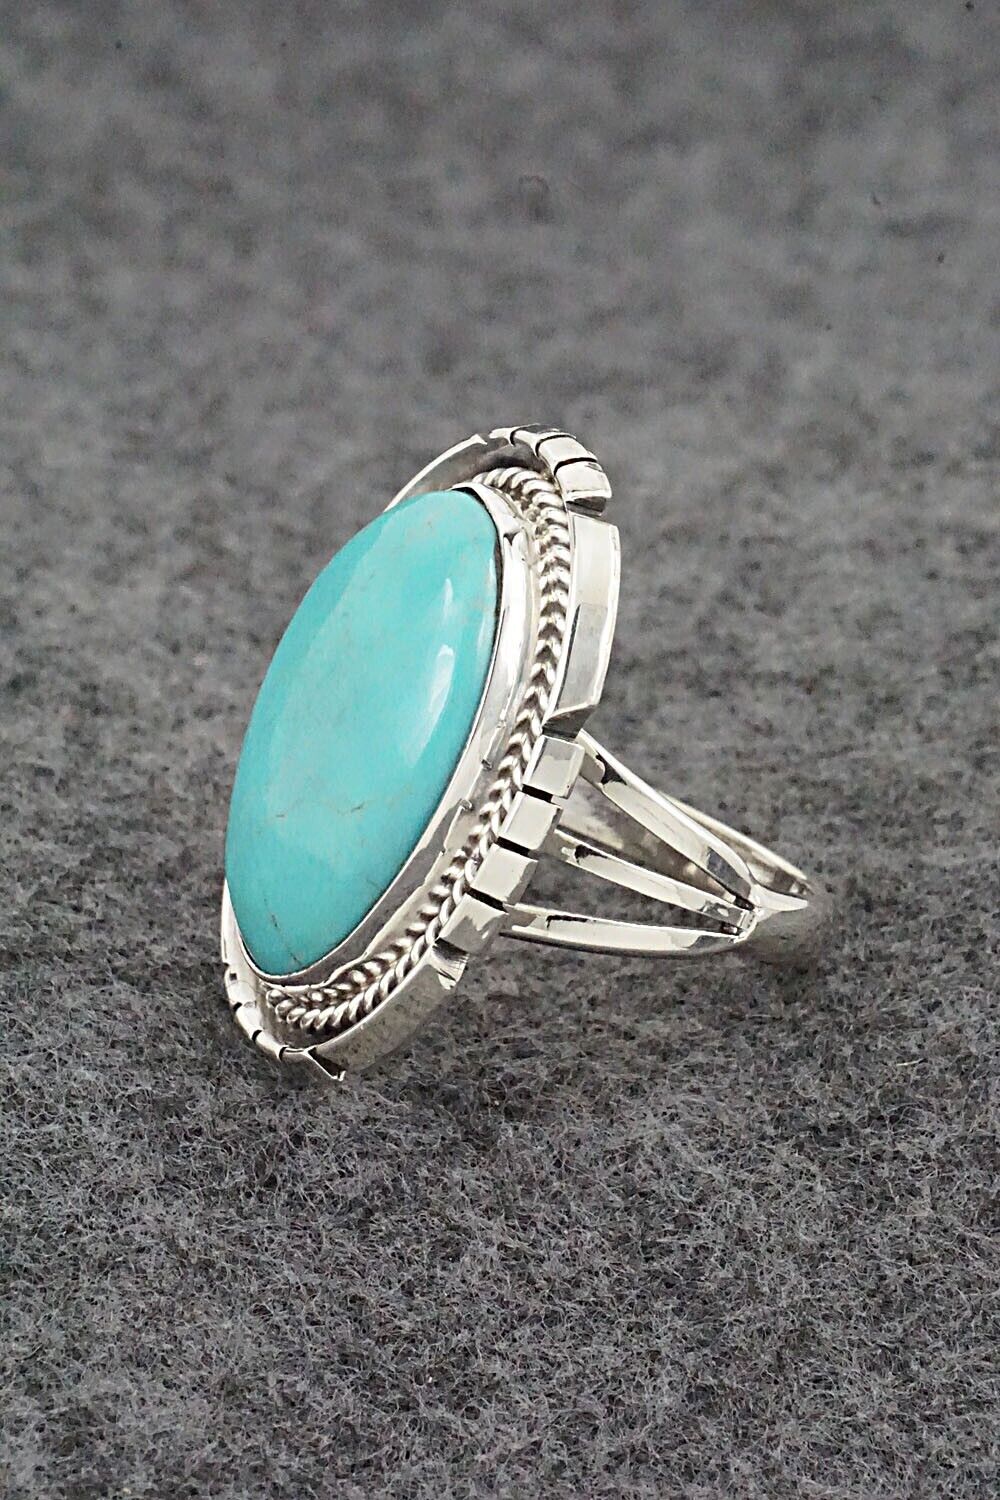 Turquoise & Sterling Silver Ring - Samuel Yellowhair - Size 9